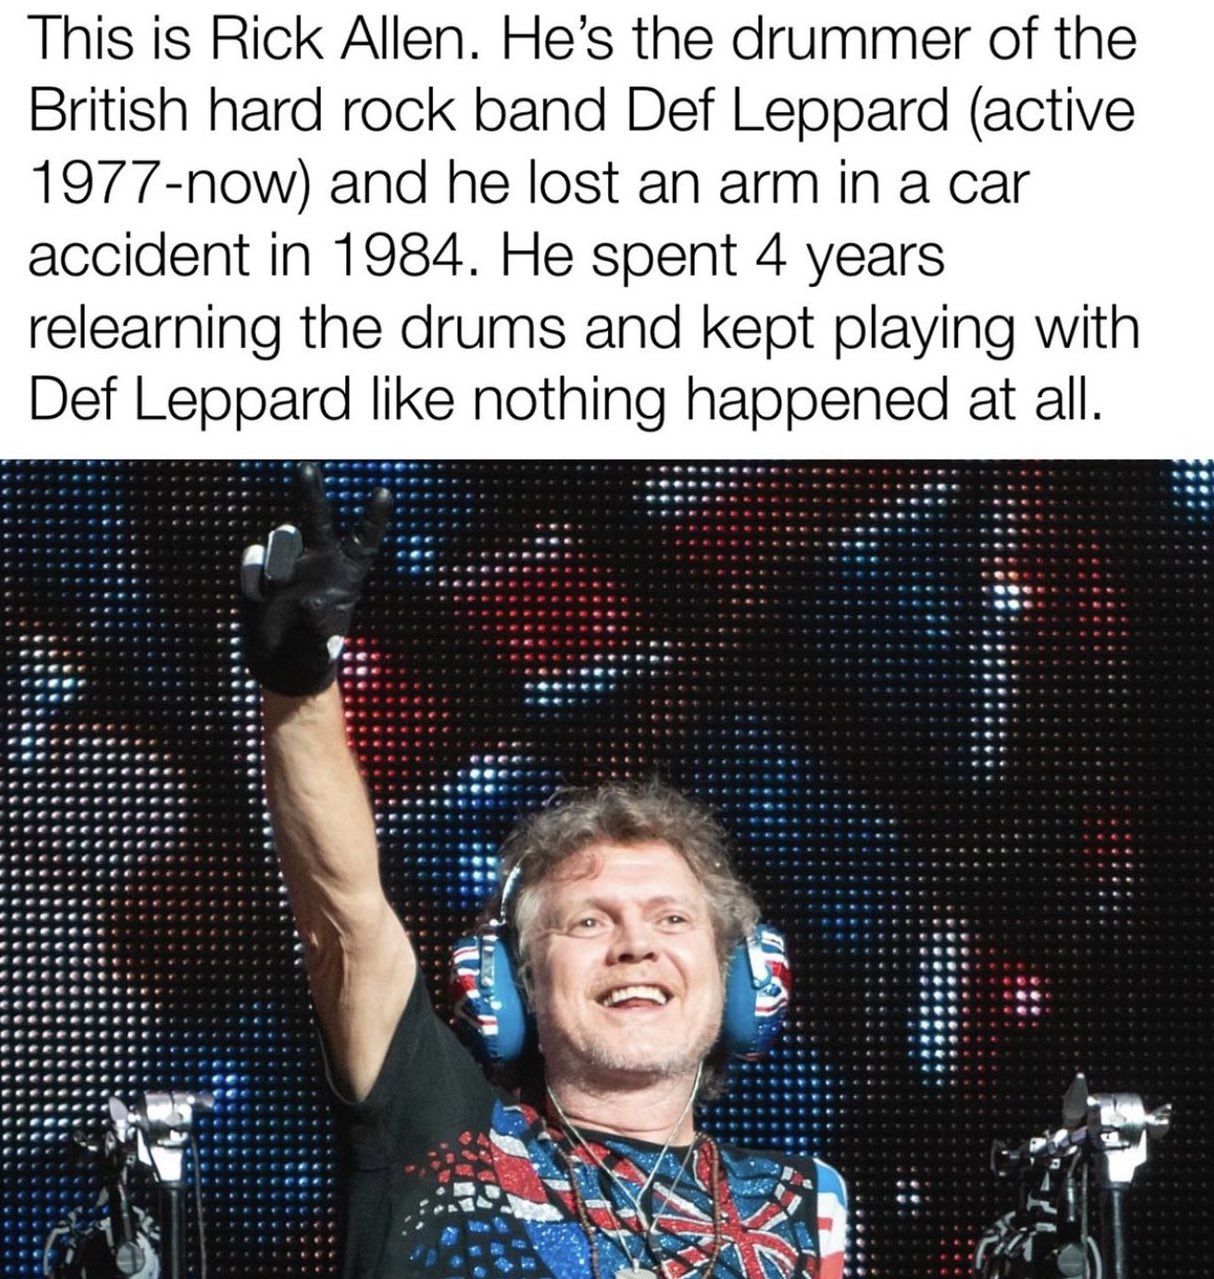 Dudes posting their wins - rick allen def leppard - This is Rick Allen. He's the drummer of the British hard rock band Def Leppard active 1977now and he lost an arm in a car accident in 1984. He spent 4 years relearning the drums and kept playing with Def